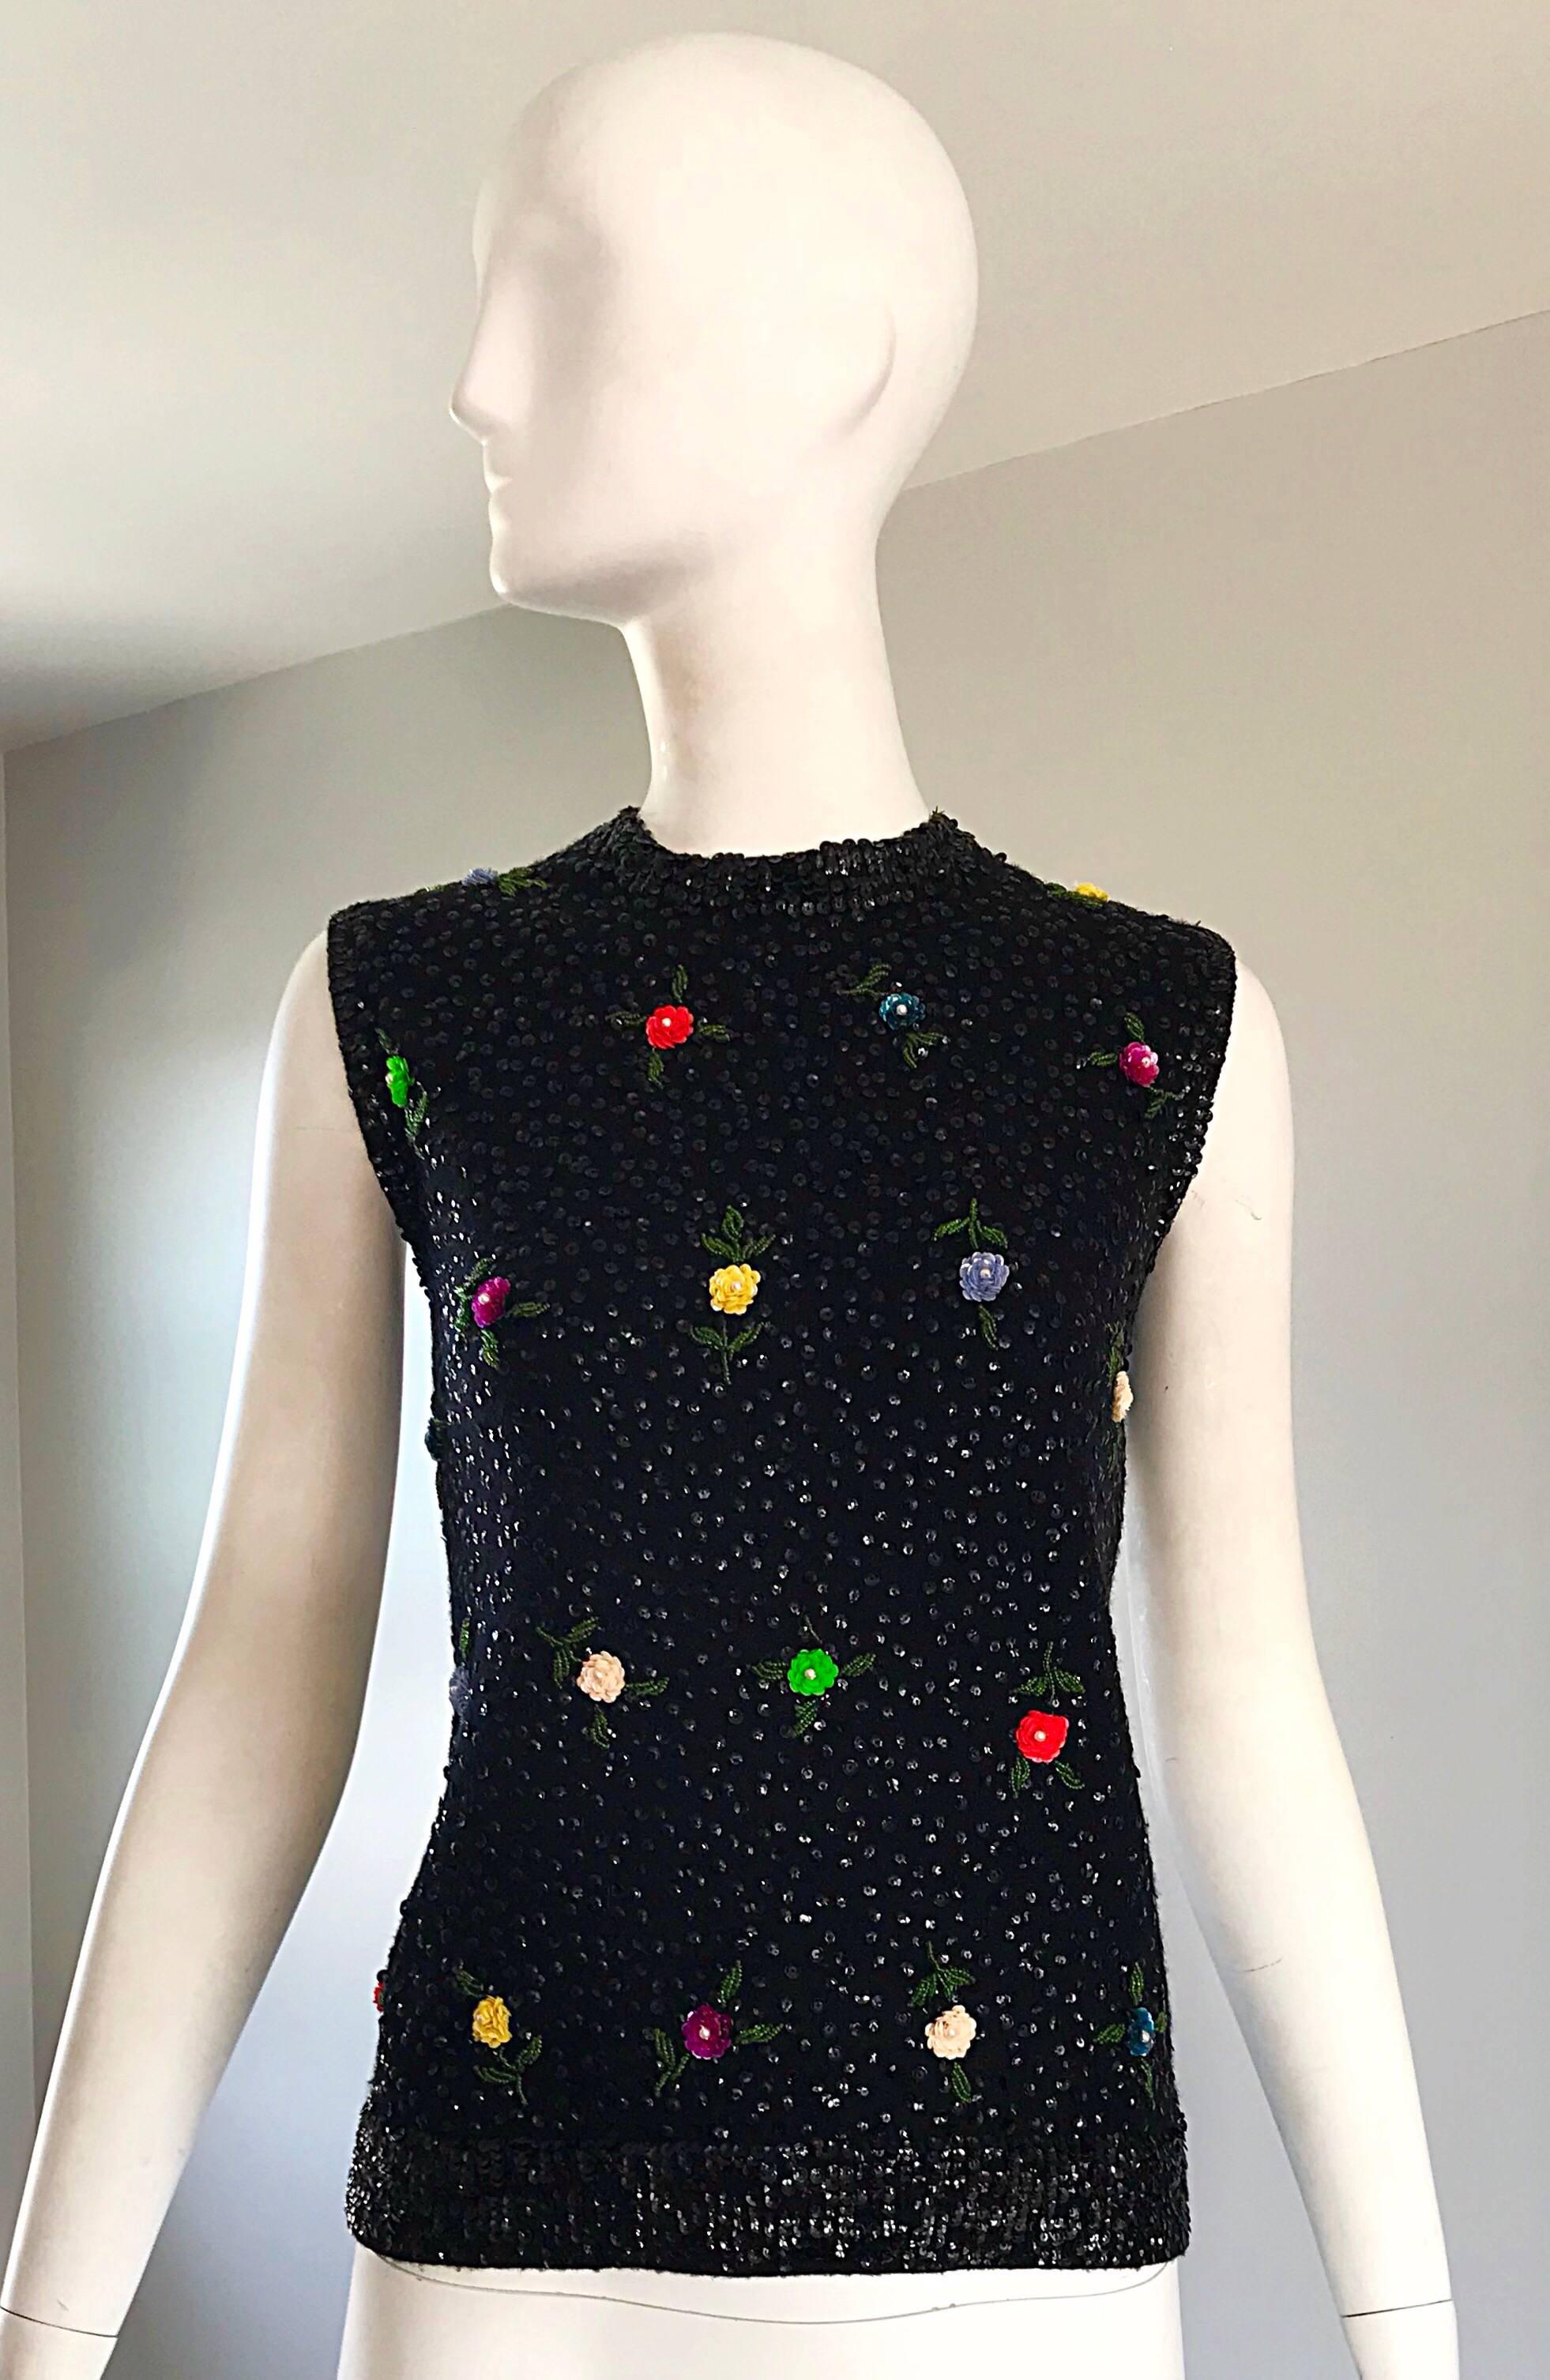 Beautiful 1950s black soft lambs wool and angora fully sequined sleeveless sweater! Features thousands of hand-sewn sequins throughout the entire piece. Brightly colored sequins sewn to look like little flowers in neon green, hot pink, yellow, red,